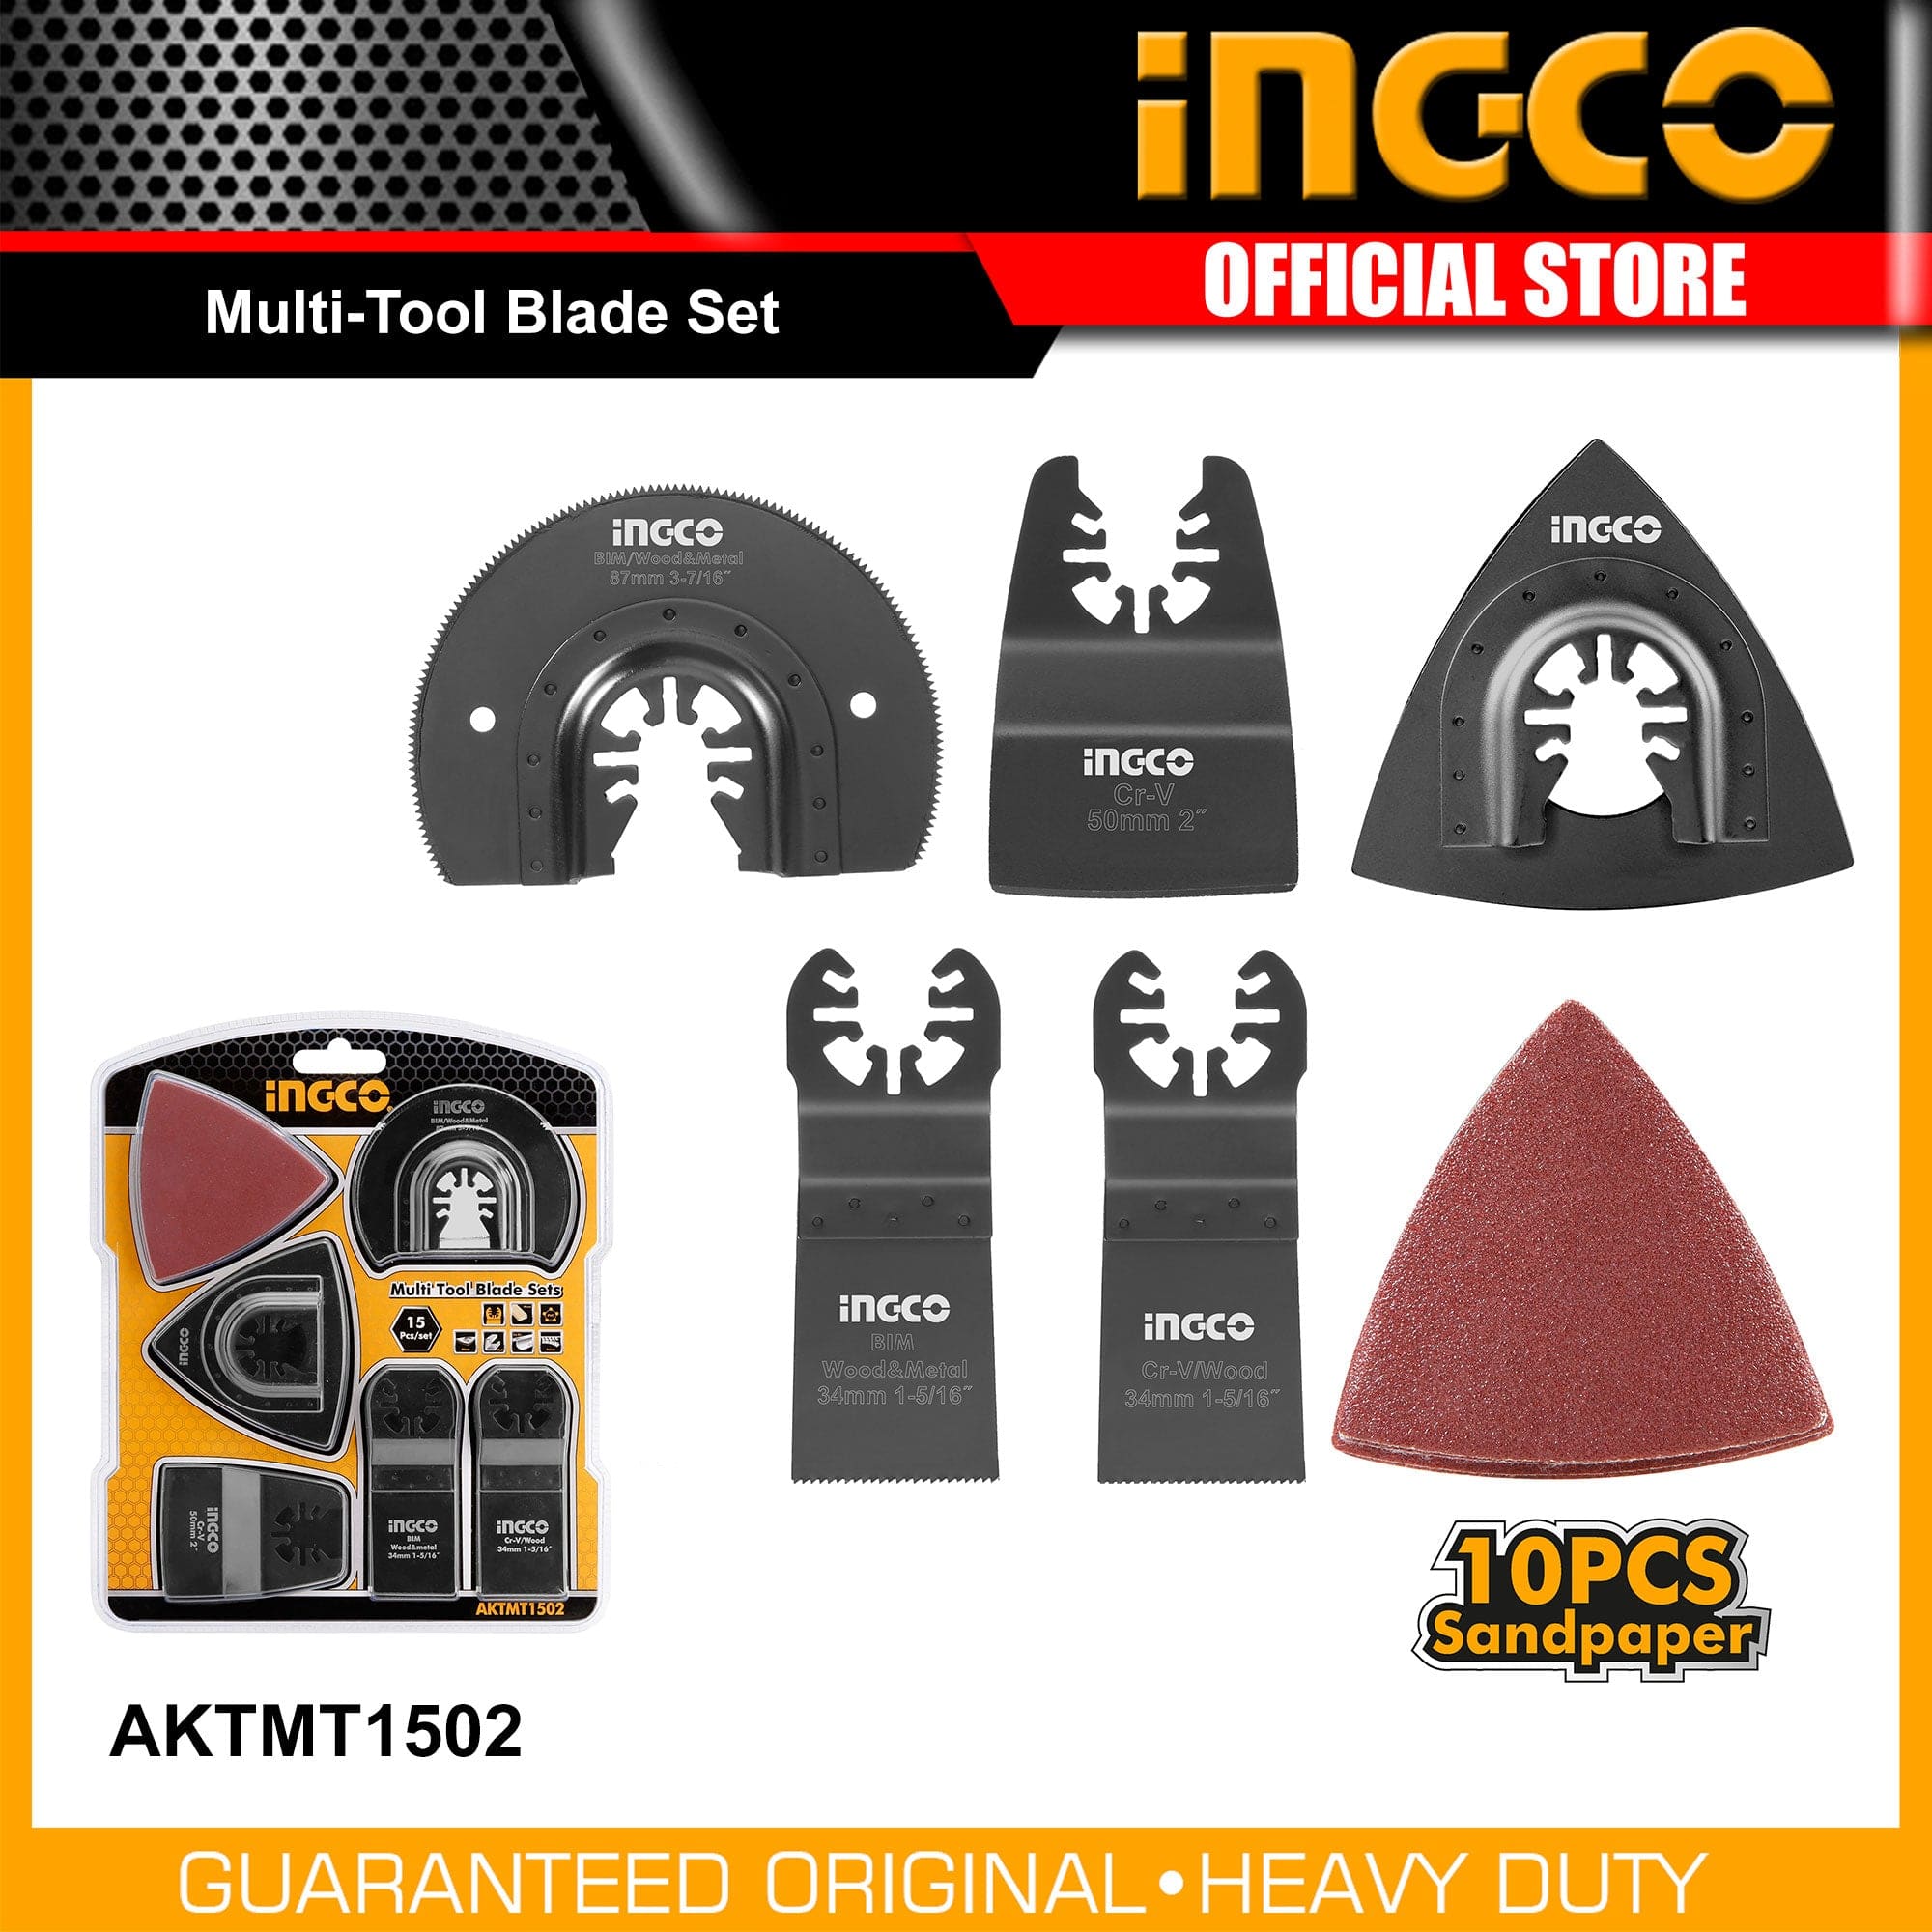 Ingco 15 Pieces Multi-Tool Blade Sets - AKTMT1502 | Supply Master | Accra, Ghana Oscillating Tool Accessories Buy Tools hardware Building materials